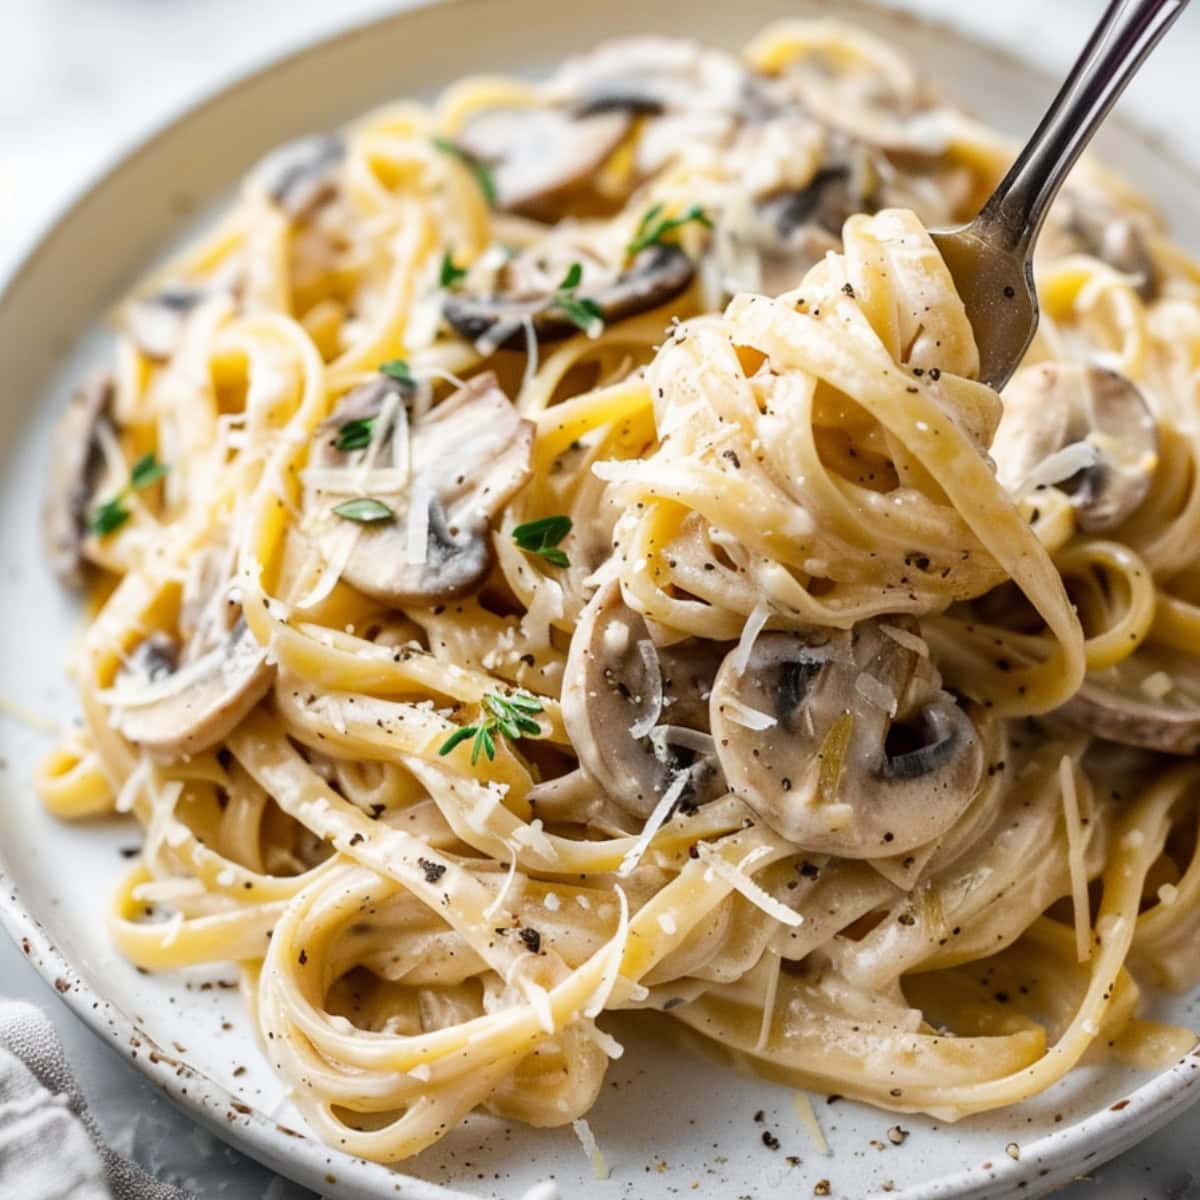 Fork lifting a serving of creamy mushroom pasta from plate.